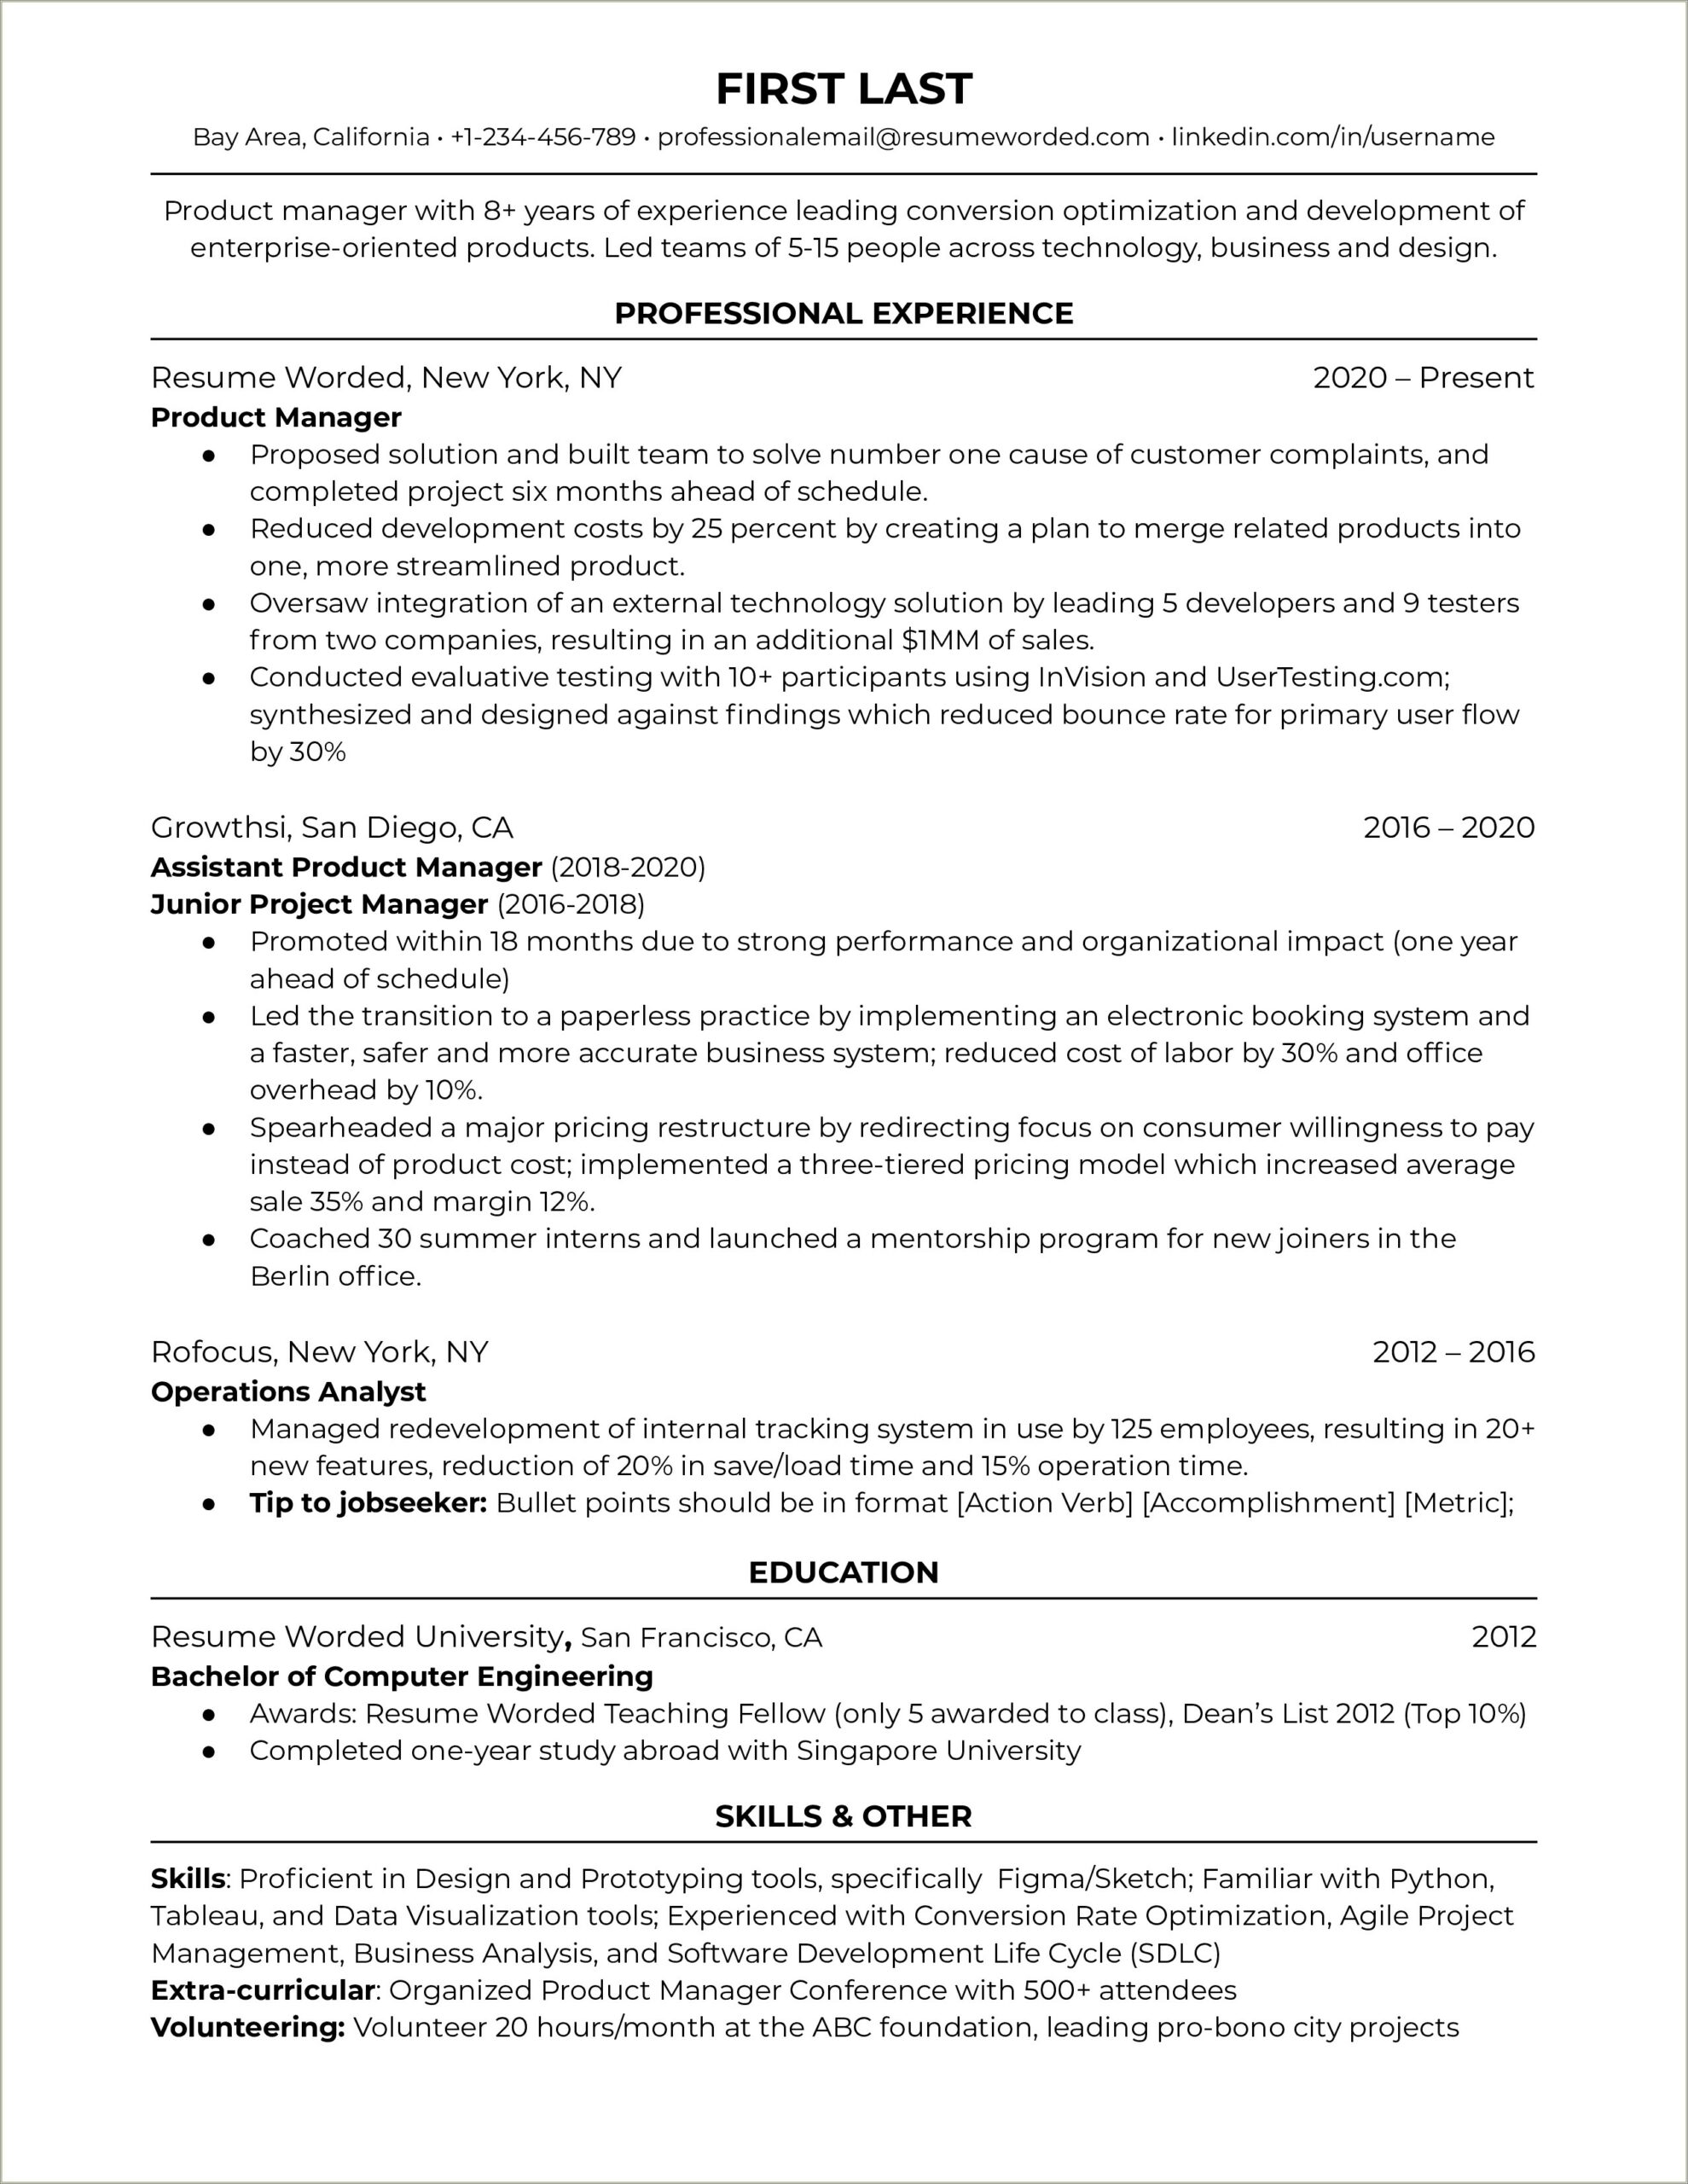 Asset To This Company Resume Examples